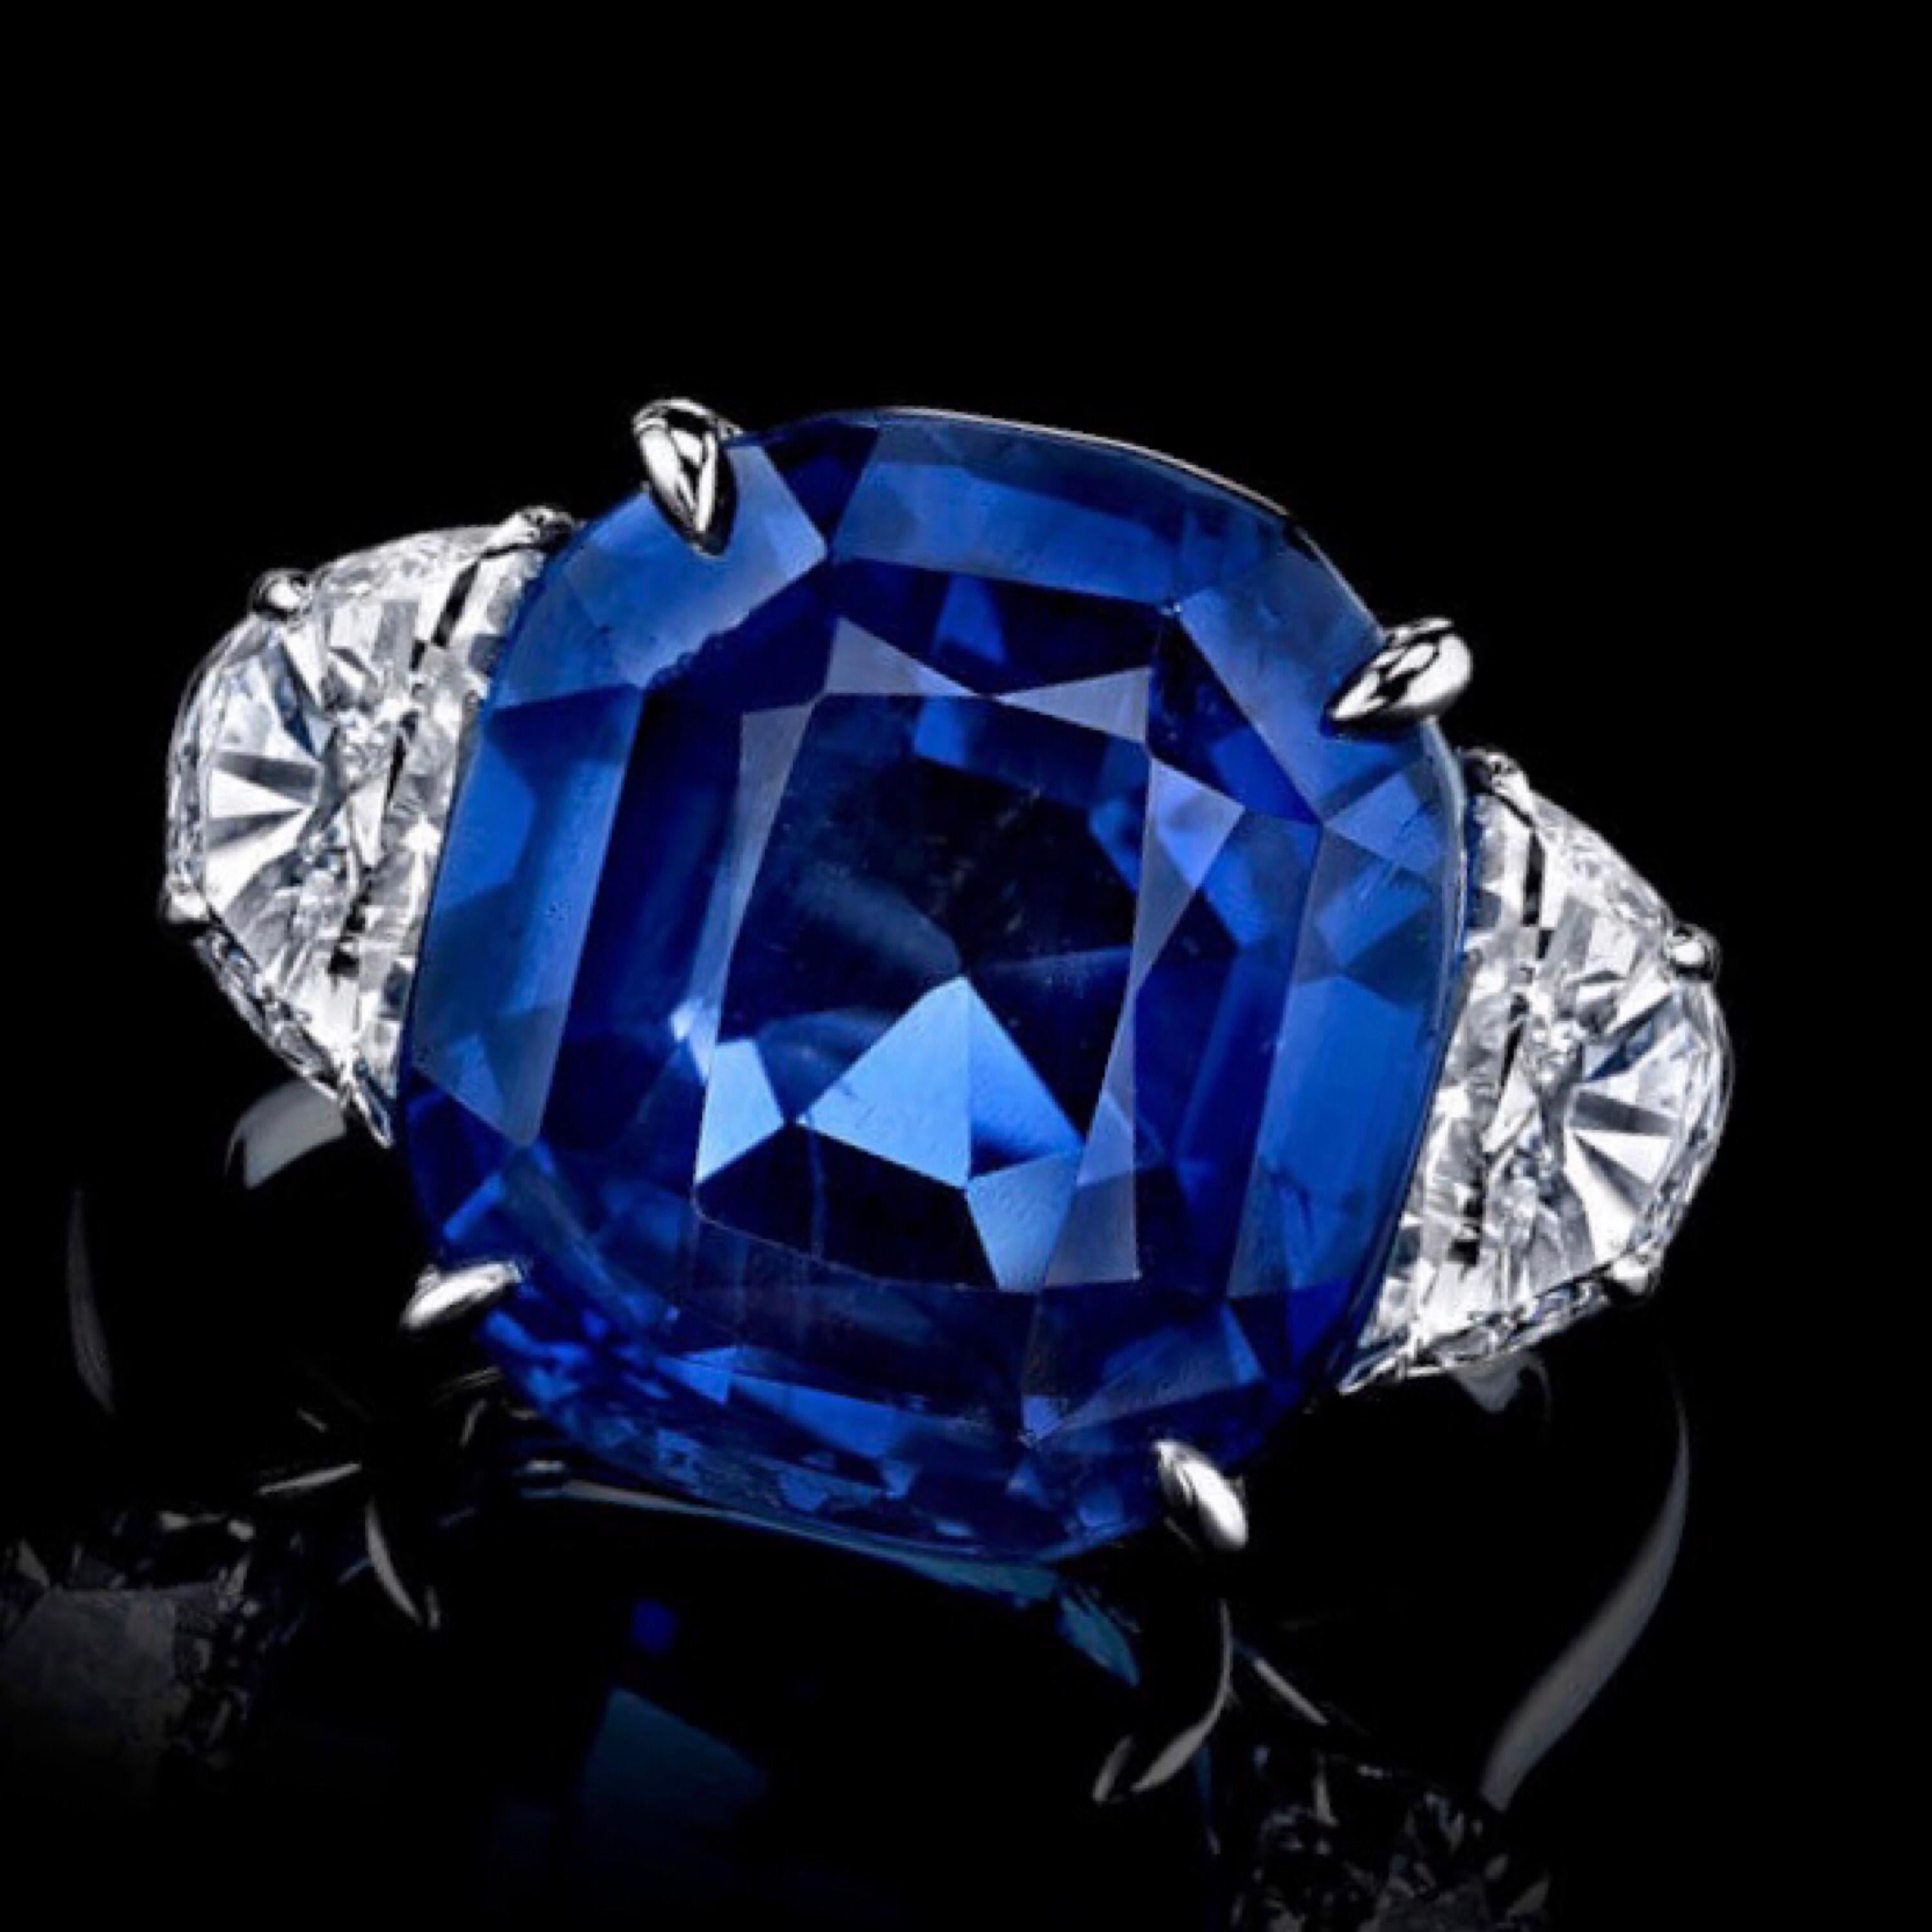 From the Emilio Jewelry Vault, Showcasing a stunning marvelous 16.00 carat Certified natural sapphire. Video available upon request.
Please inquire for more images, the certificate, diamond weights, or appraisals. Custom re-design available.
This